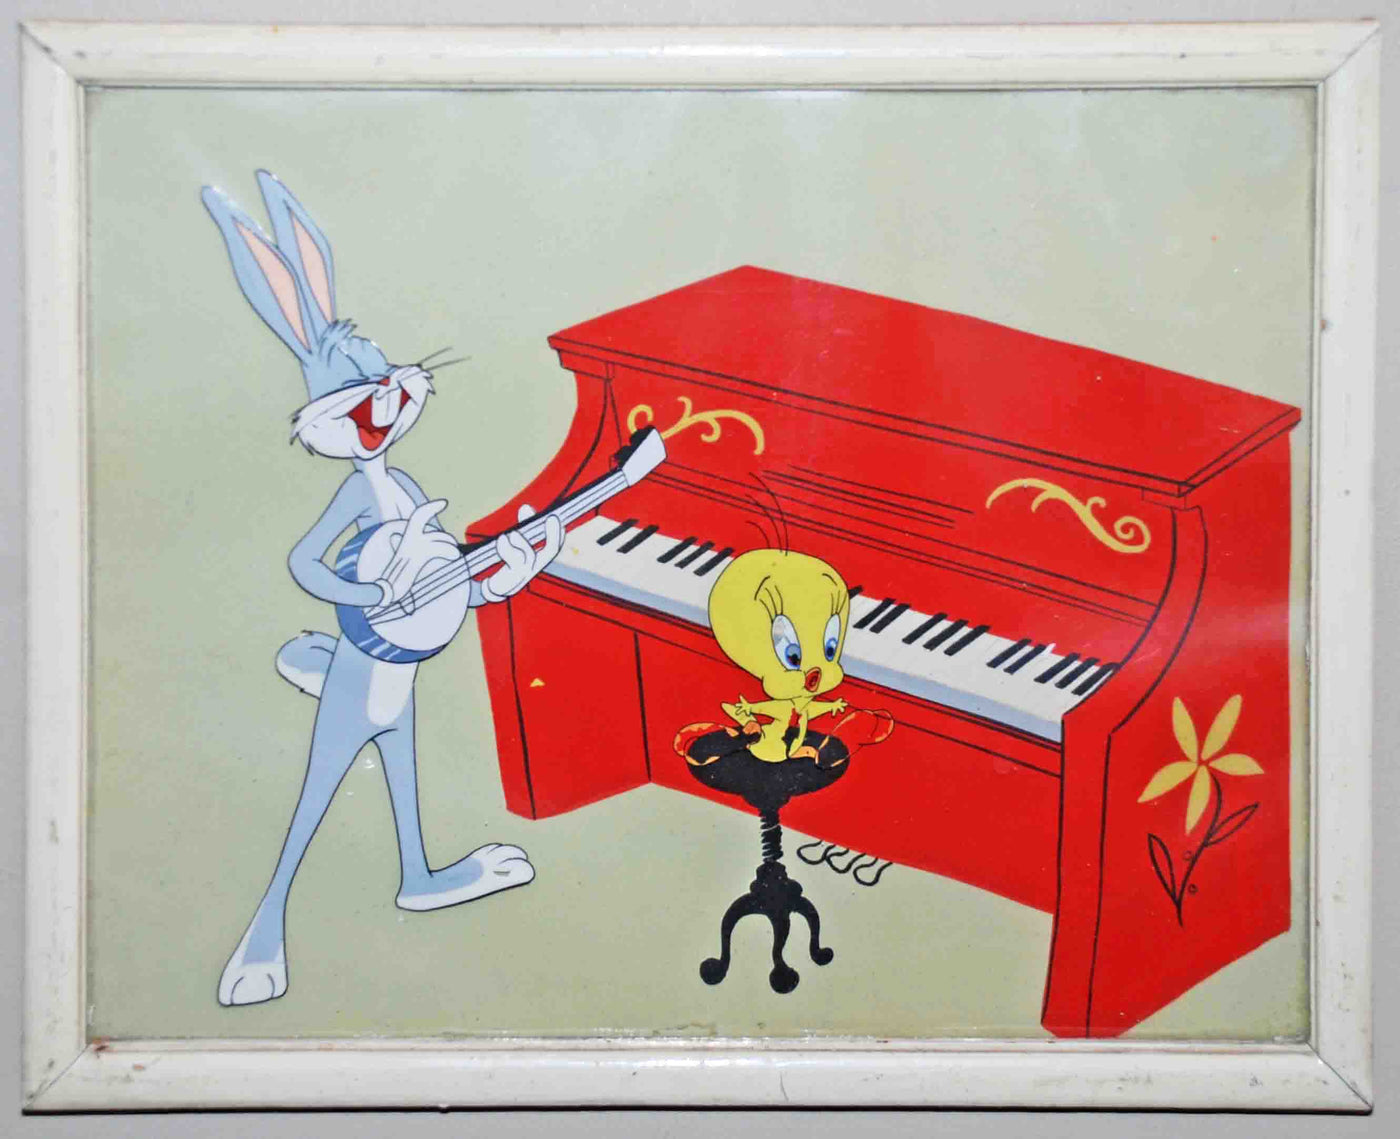 Original Warner Brothers Production Cel Featuring Bugs Bunny and Tweety Bird